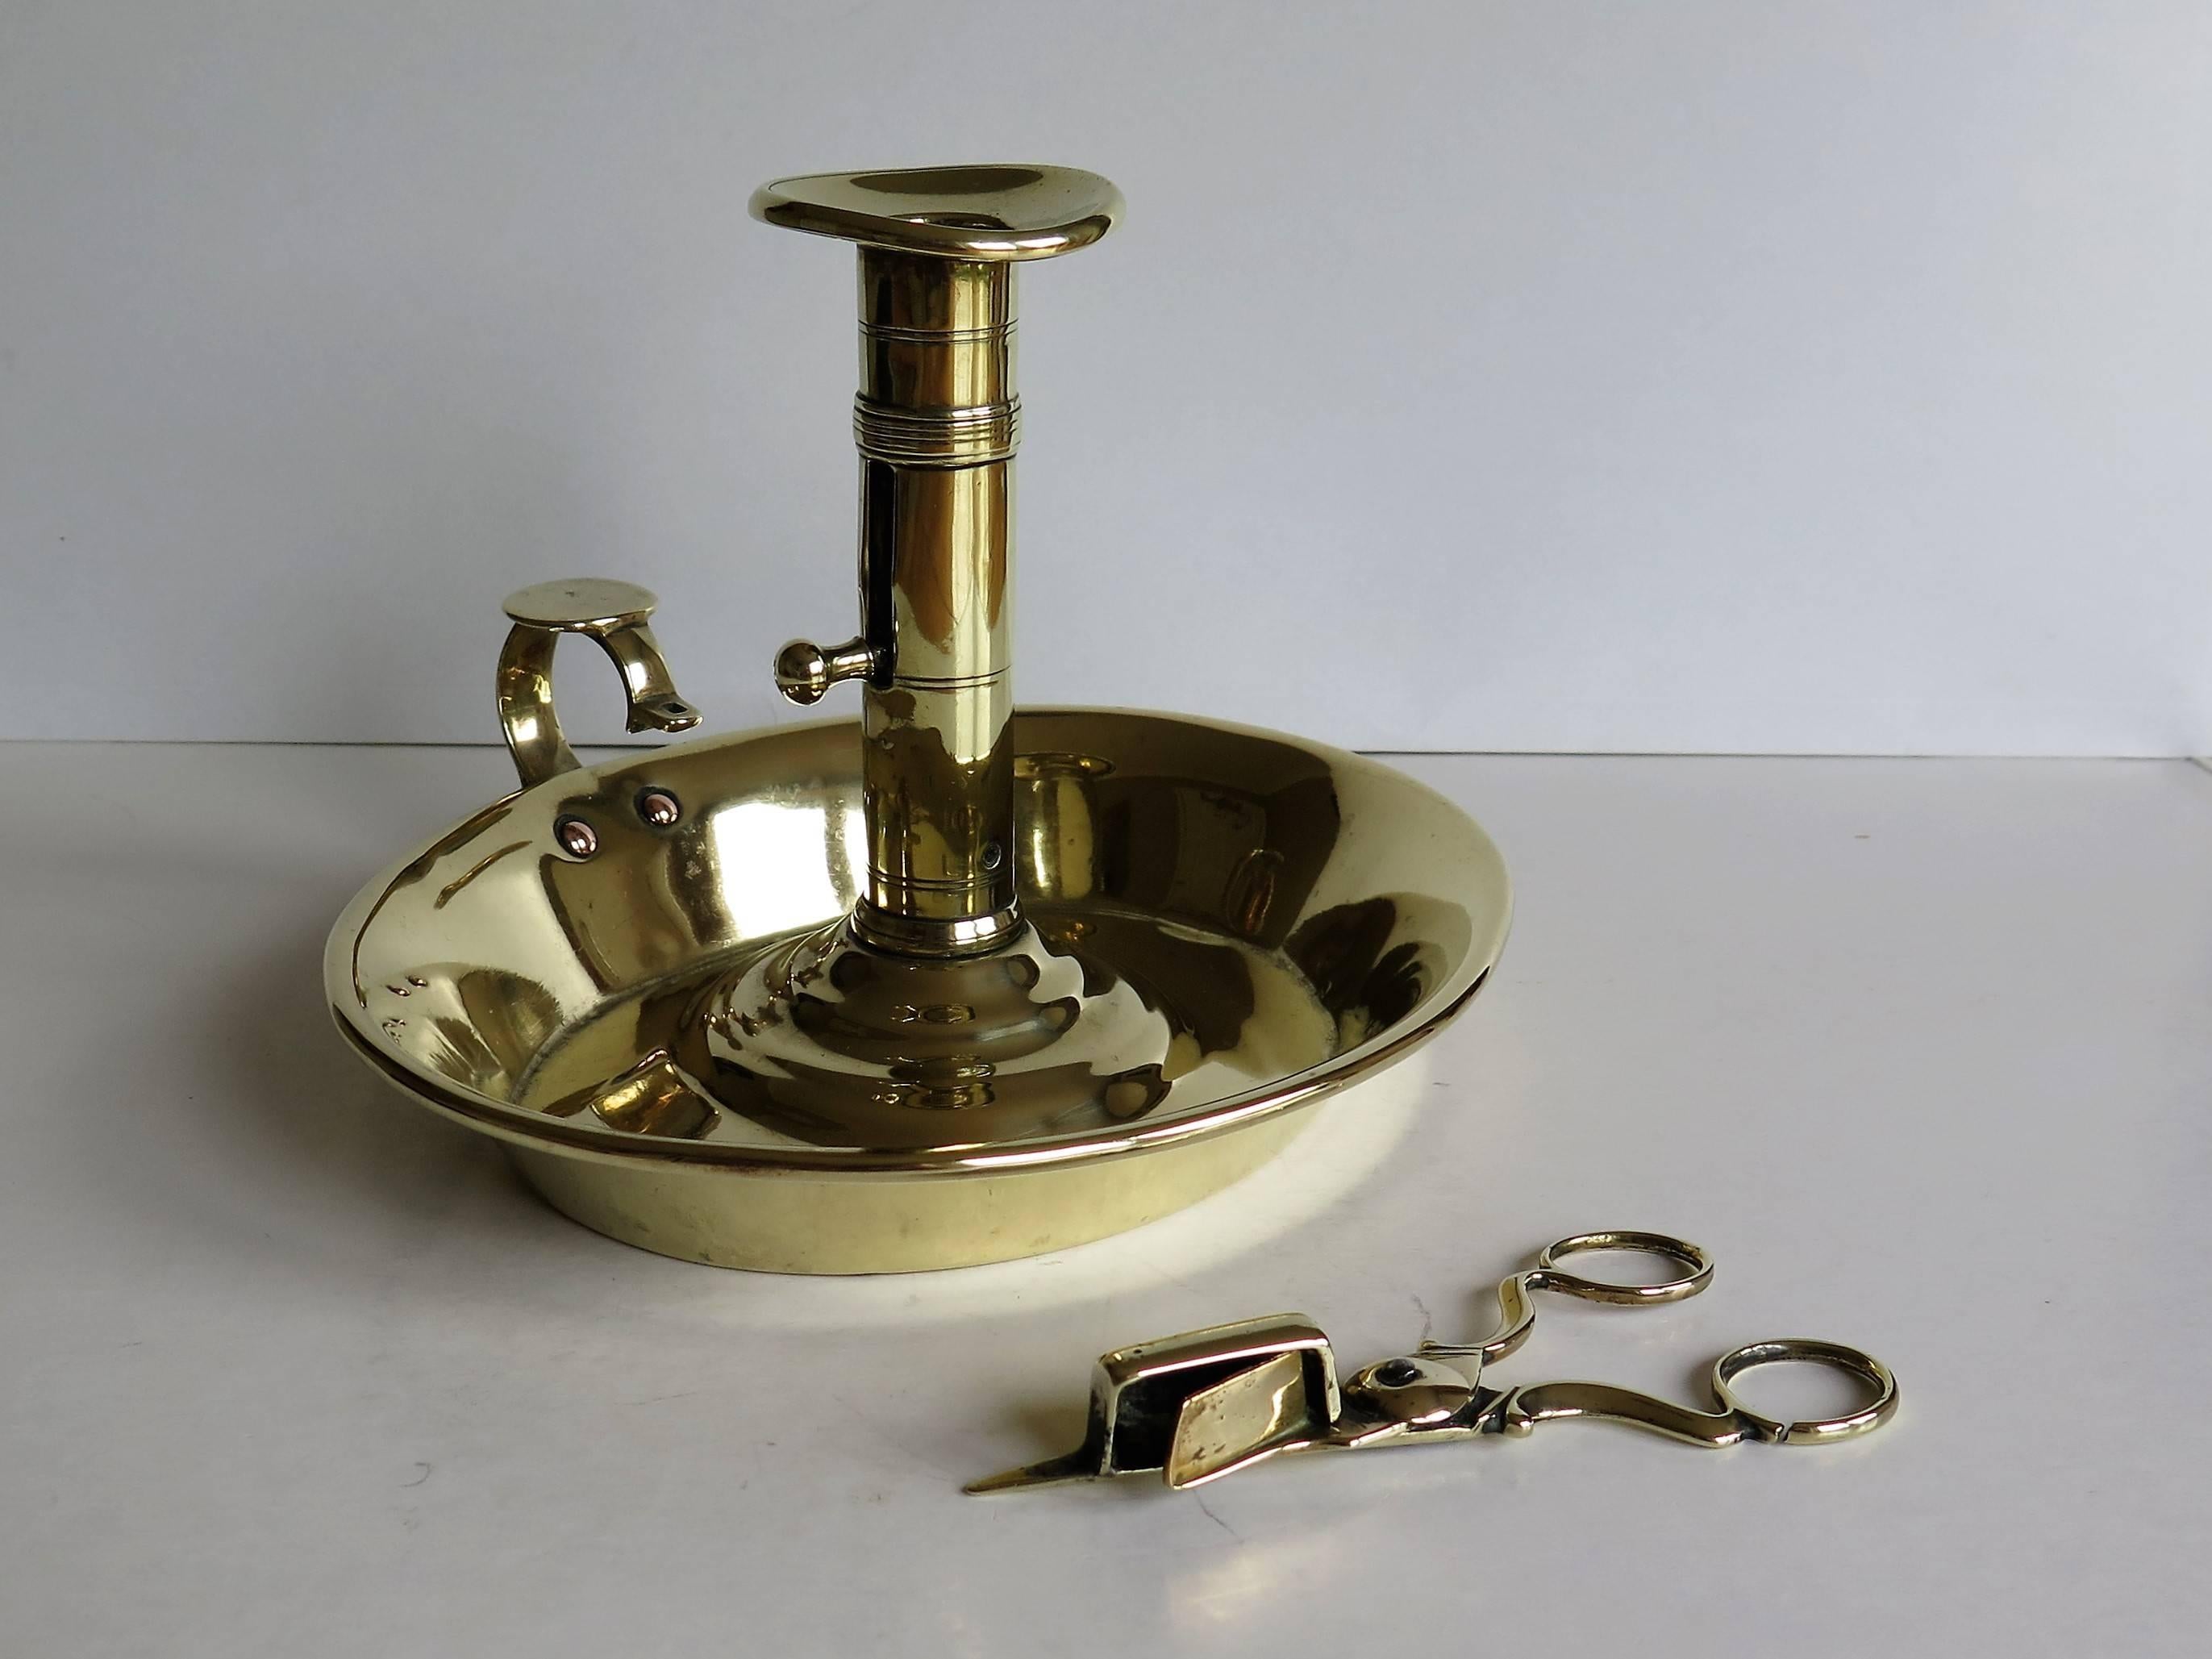 This is a late Georgian English chamberstick or candlestick with an associated wick snuffer or trimmer, both items made of brass and dating to the very early 19th century.

The chamberstick has an oval base with a high loop handle. The stem has a